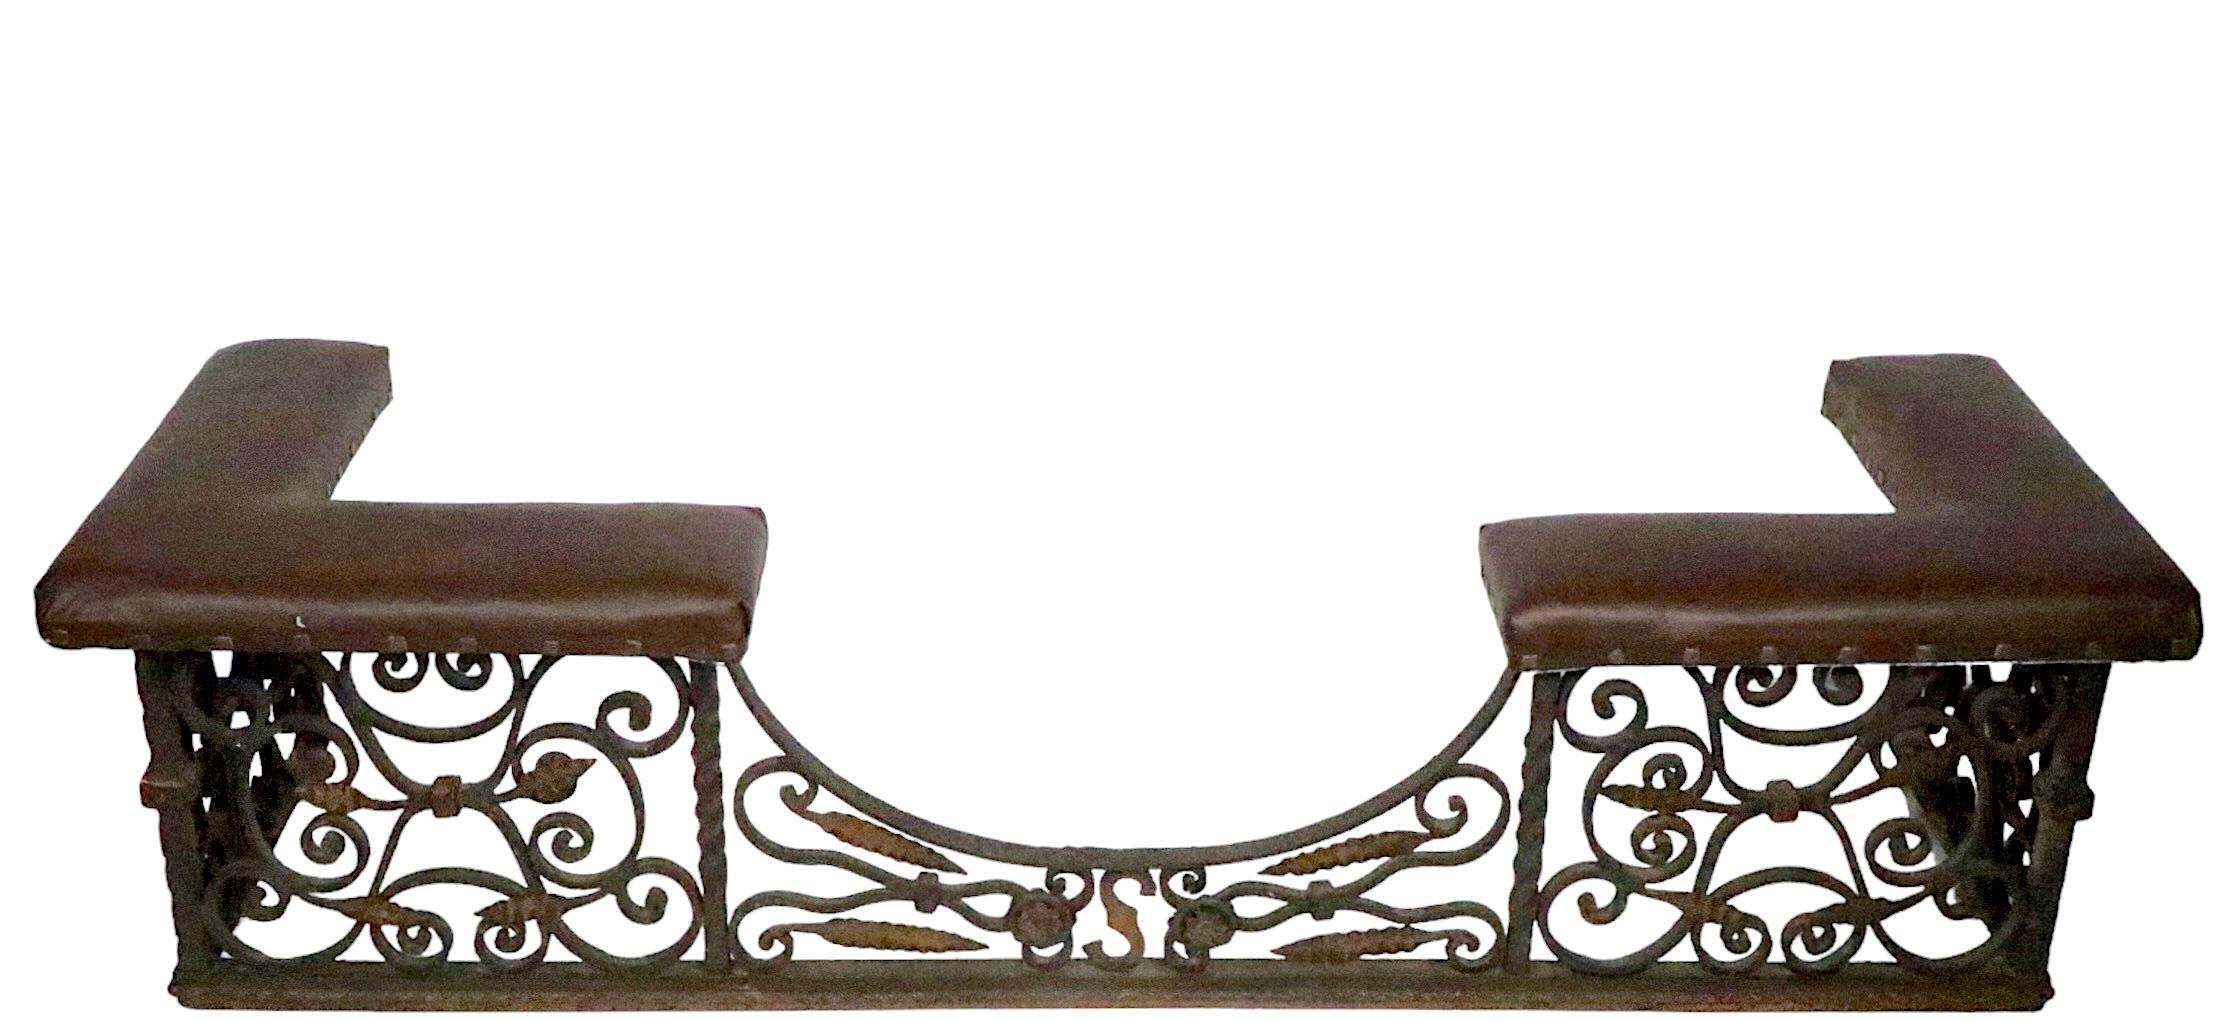 Antique Arts and Crafts Gothic Spanish Style Wrought Iron Bench Club Fender For Sale 4